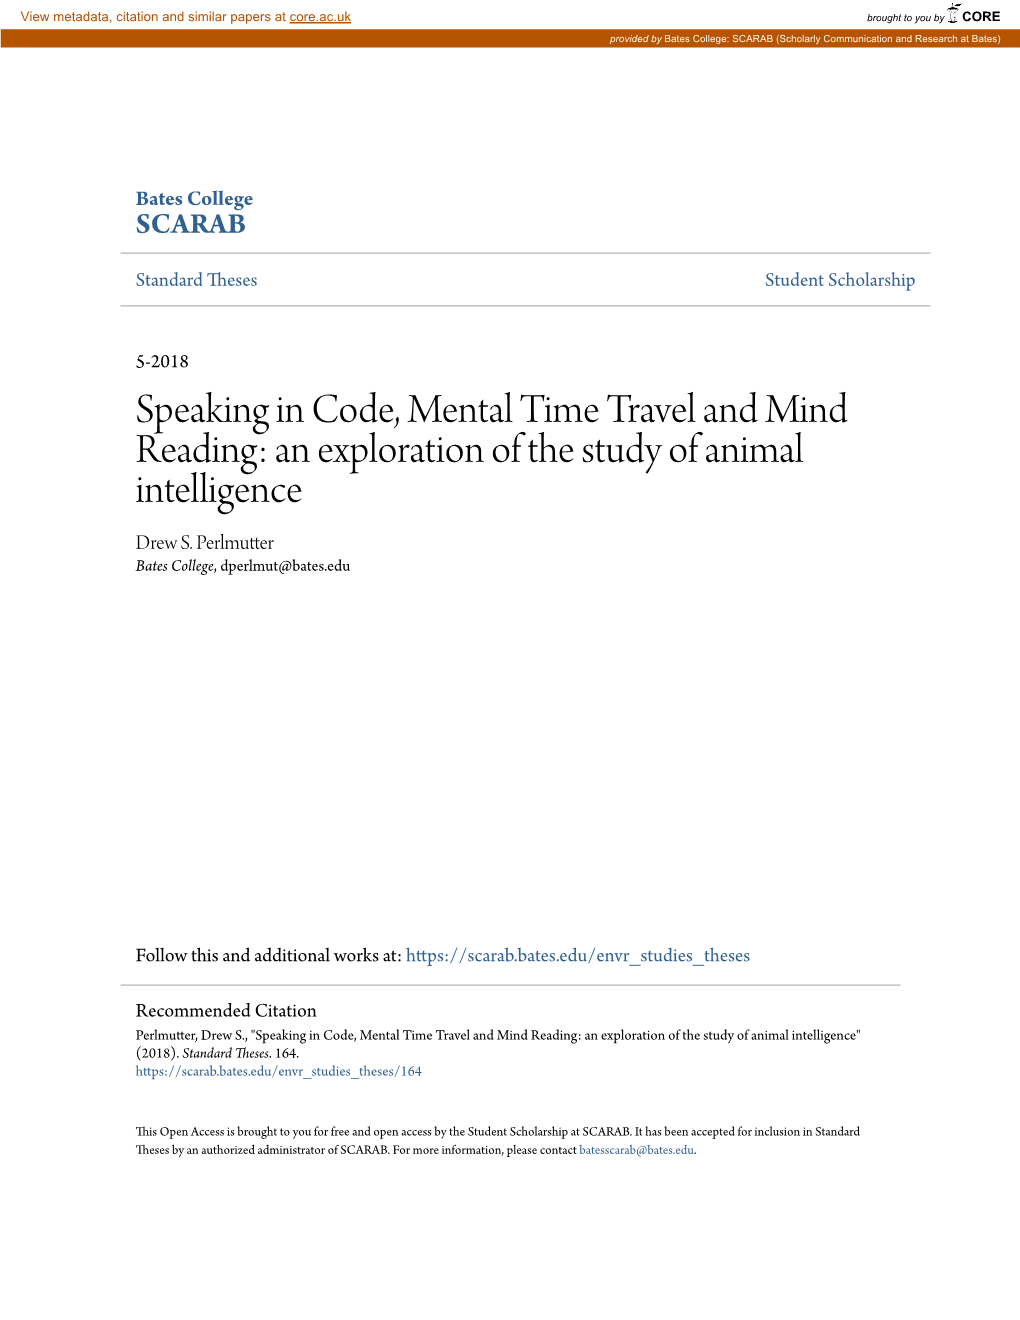 Speaking in Code, Mental Time Travel and Mind Reading: an Exploration of the Study of Animal Intelligence Drew S